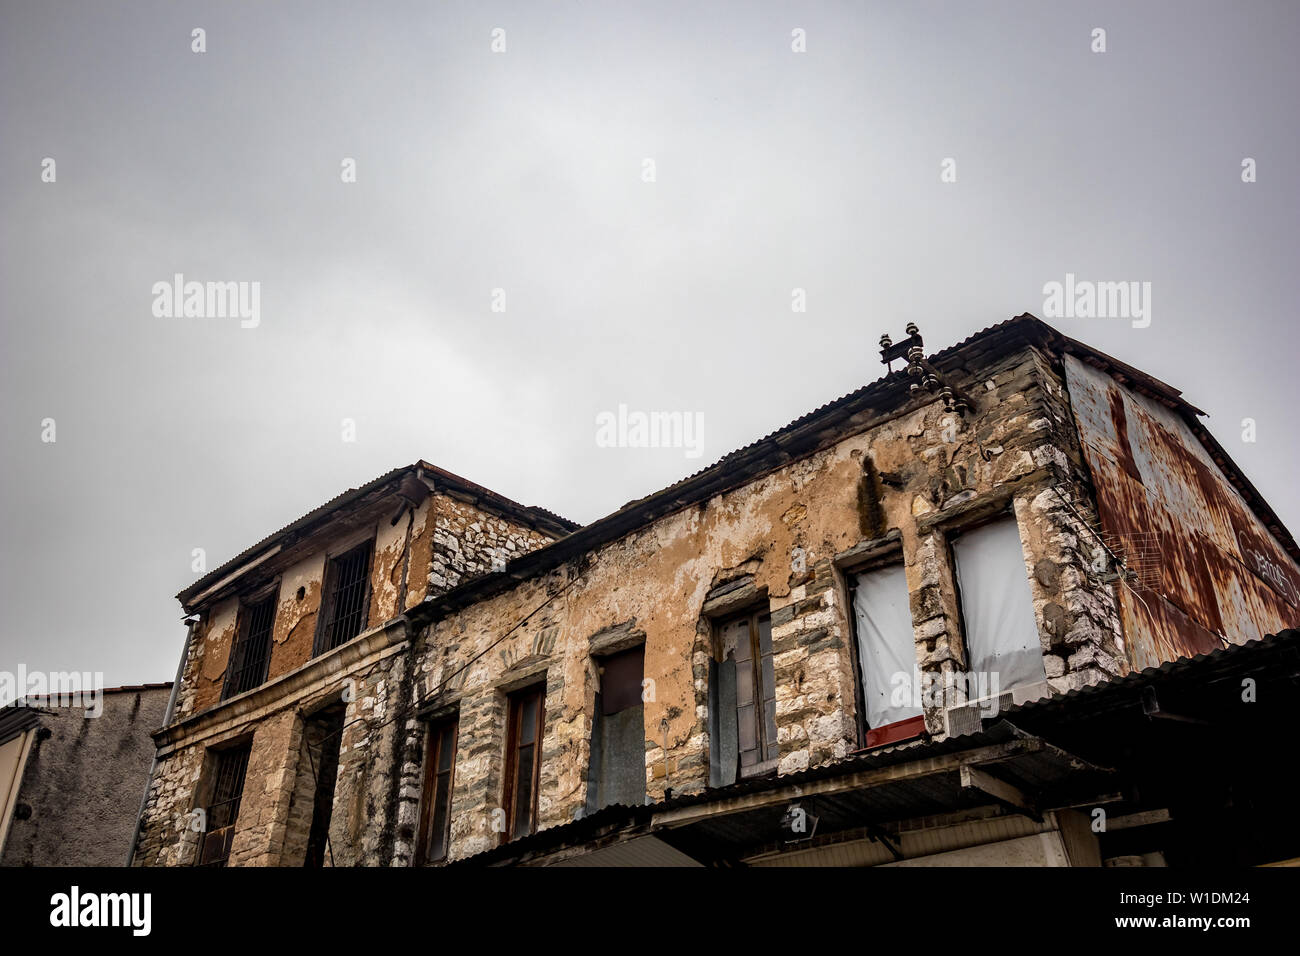 Old Greek industrial building under construction with bricks visible, Ioannina downtown, Greece. Moody foggy spring morning, no people Stock Photo